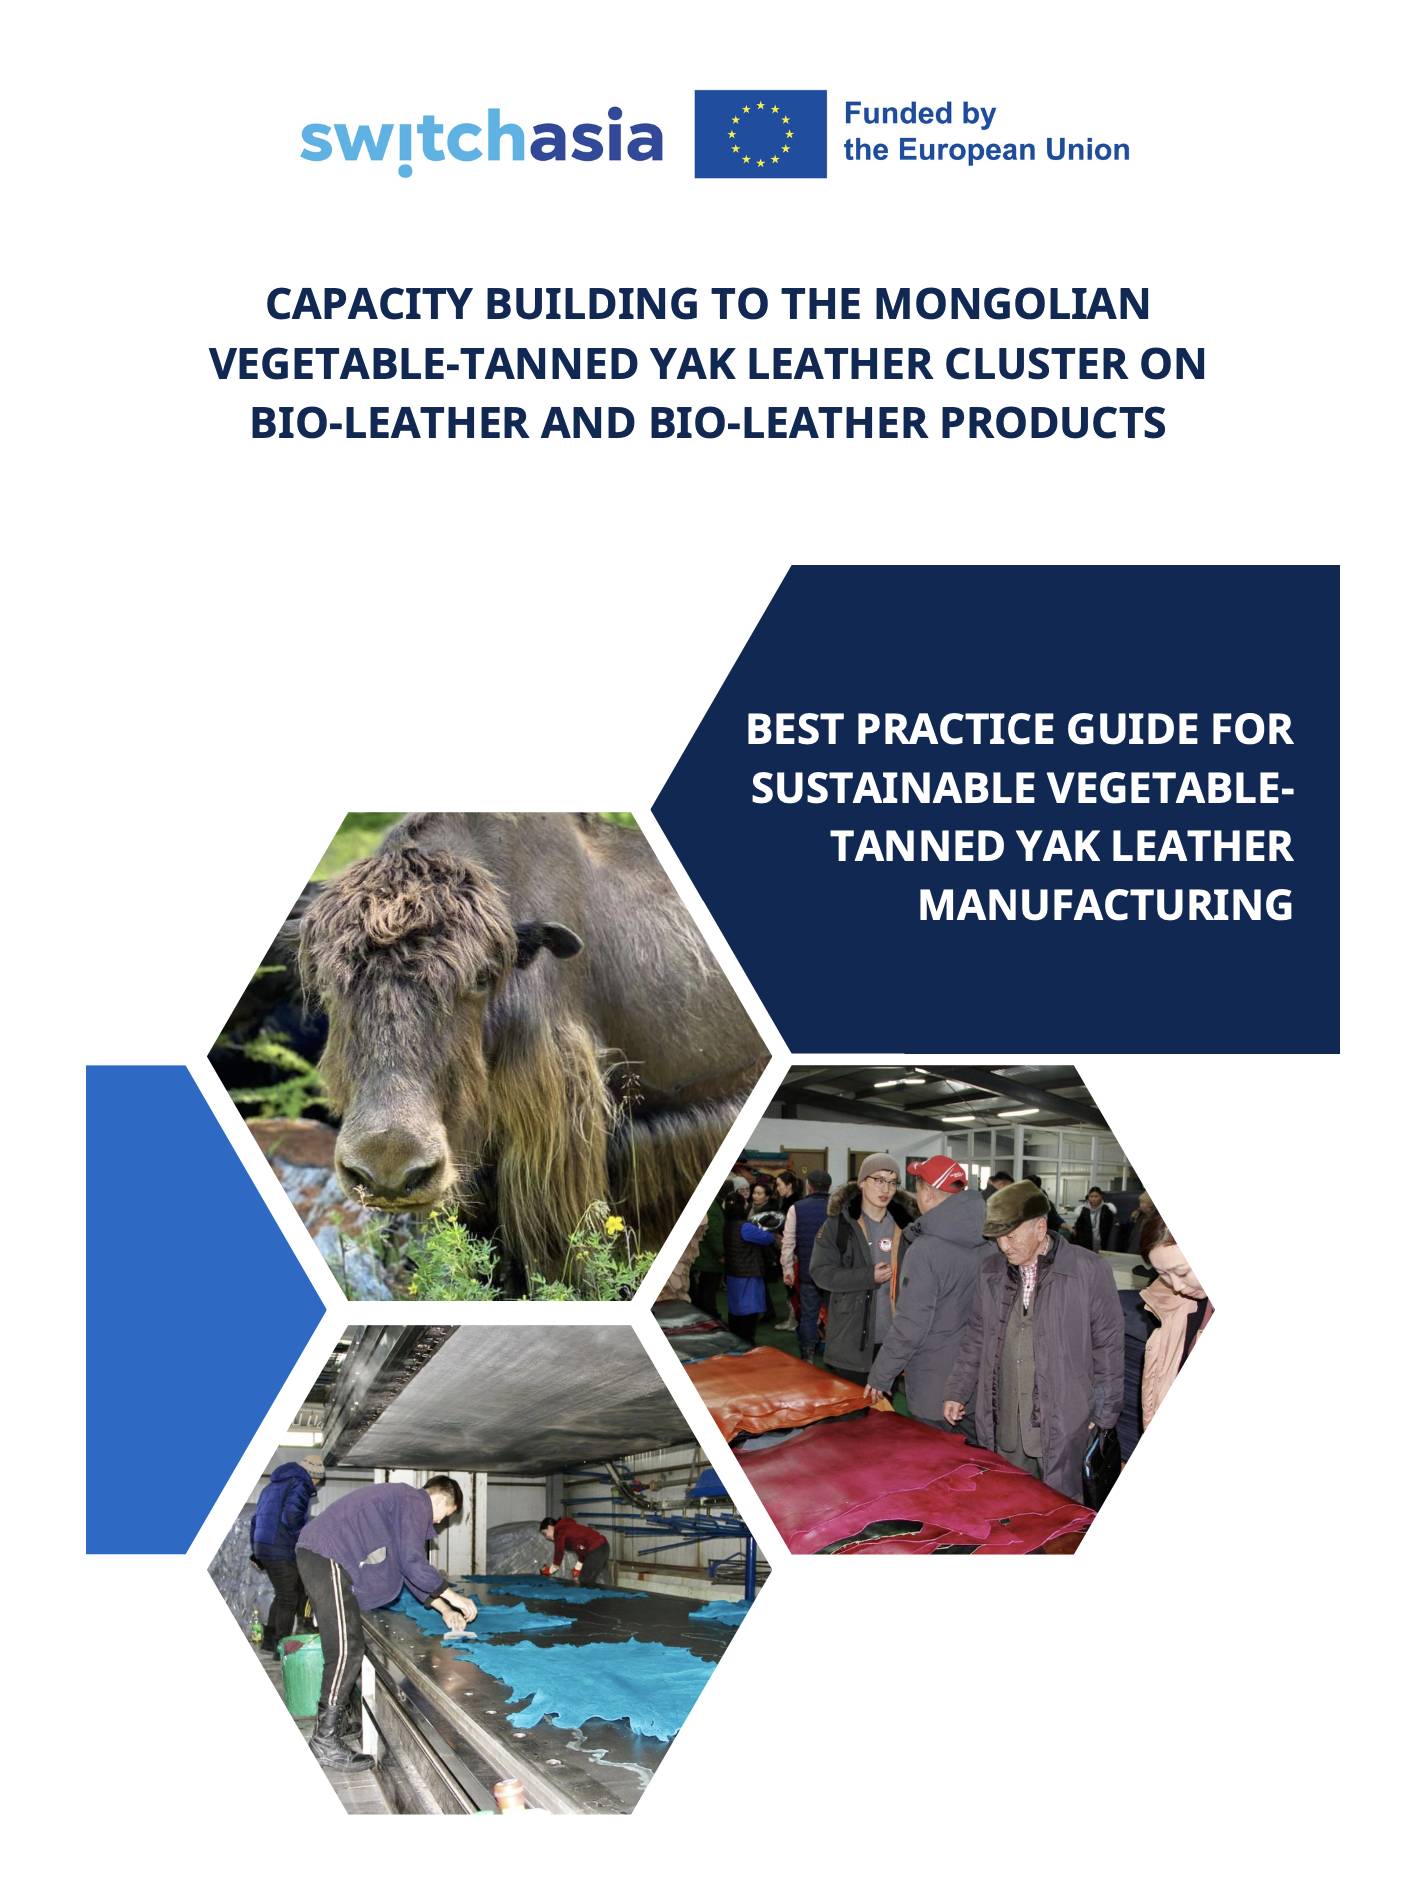 Best Practice Guide for Sustainable Vegetable-Tanned Yak Leather Manufacturing (EN)